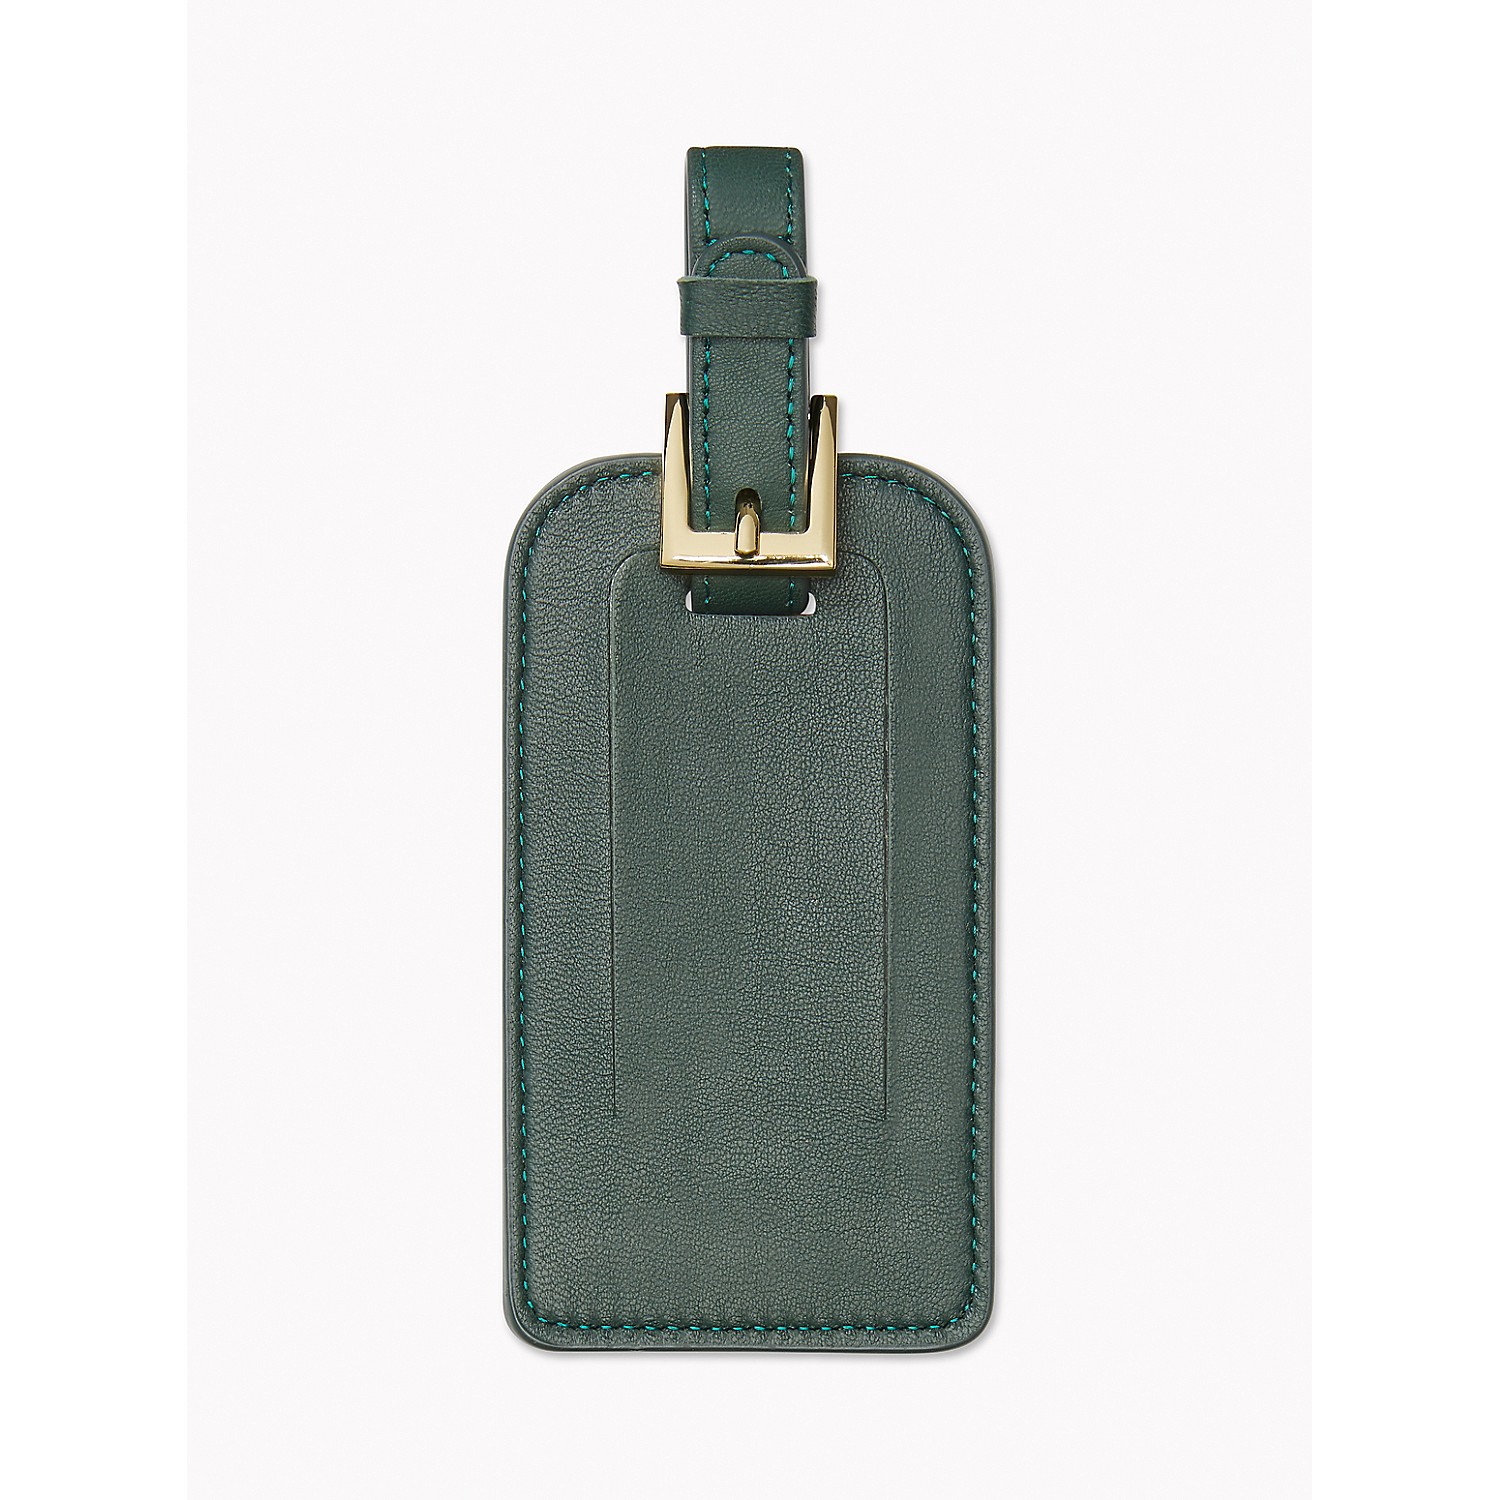 TOMMY HILFIGER Green Luggage Tag with Buckle